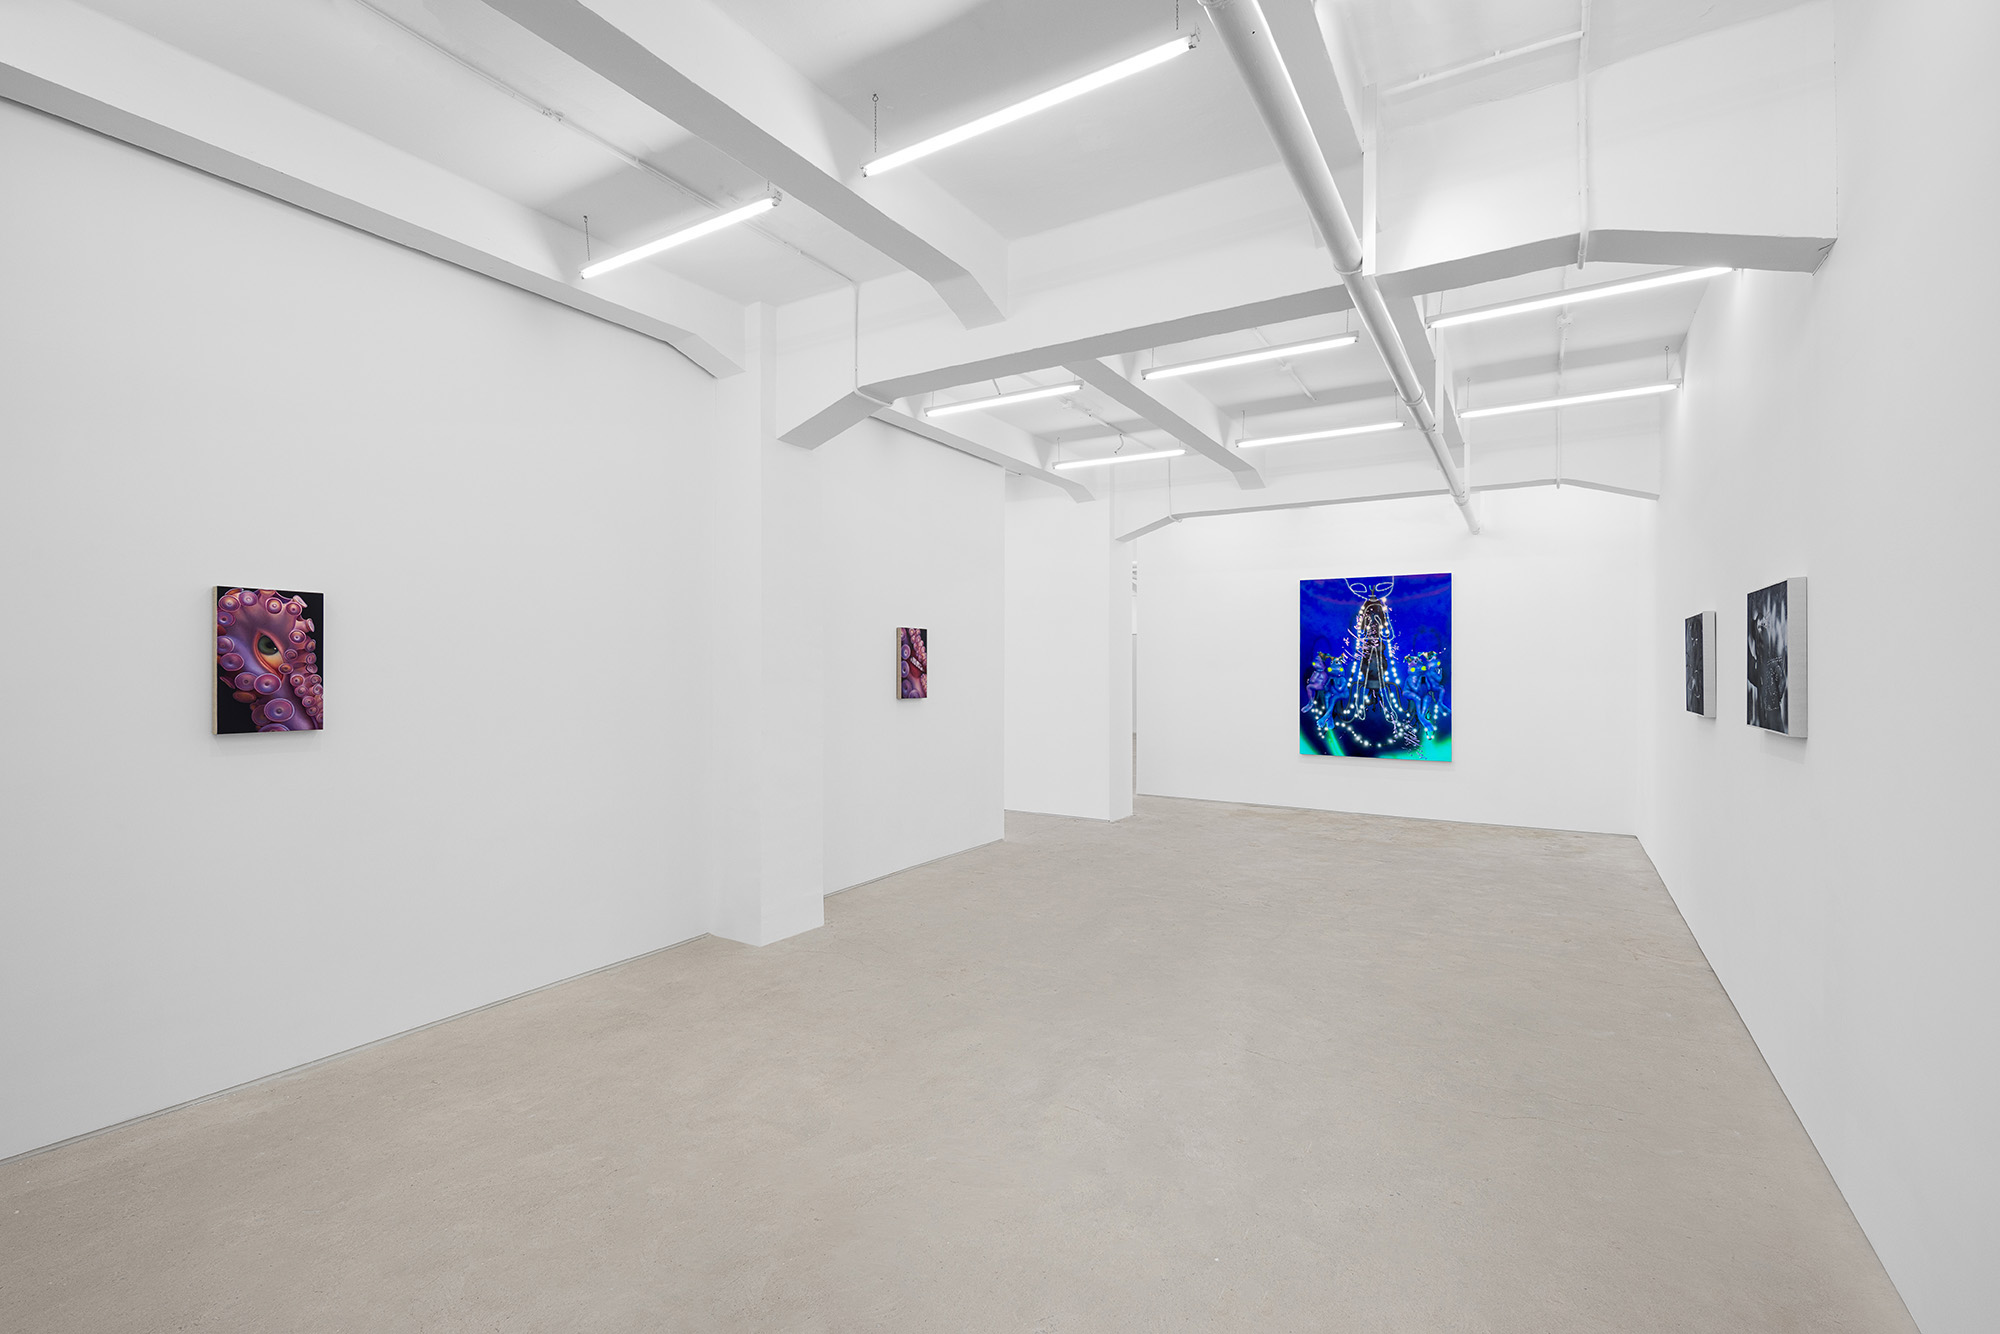 Installation view of group exhibition, Vacation II, at Gallery Vacancy, featuring works by Rao Weiyi and Ariane Heloise Hughes.